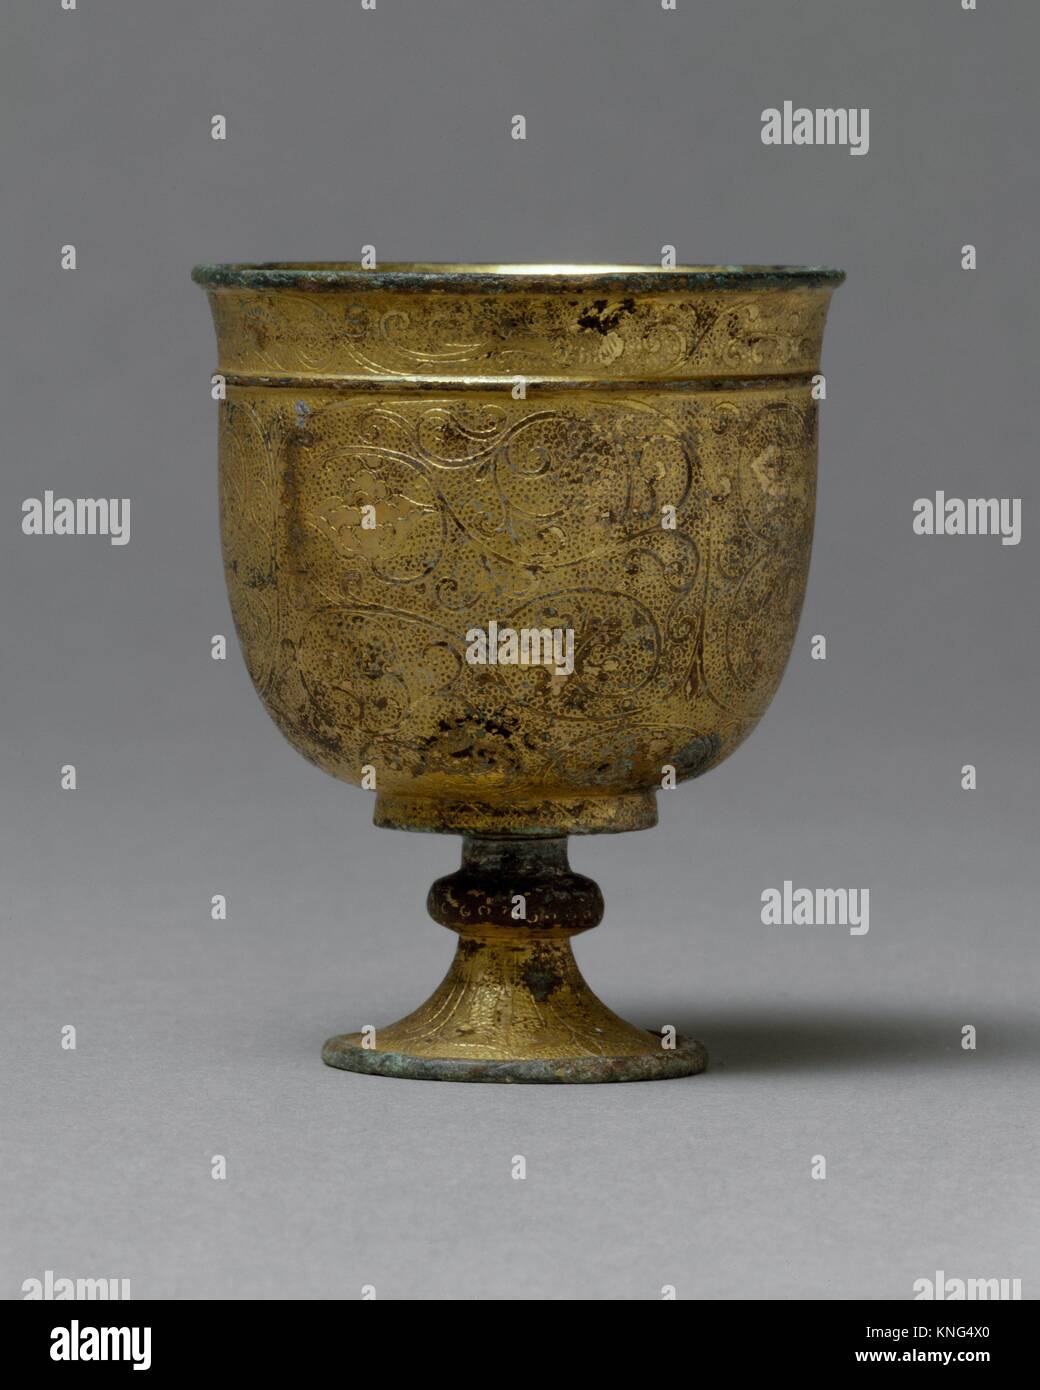 Stem Cup. Period: Tang dynasty (618-907); Date: late 7th-early 8th century; Culture: China; Medium: Cast bronze with gilding and traced and punched Stock Photo